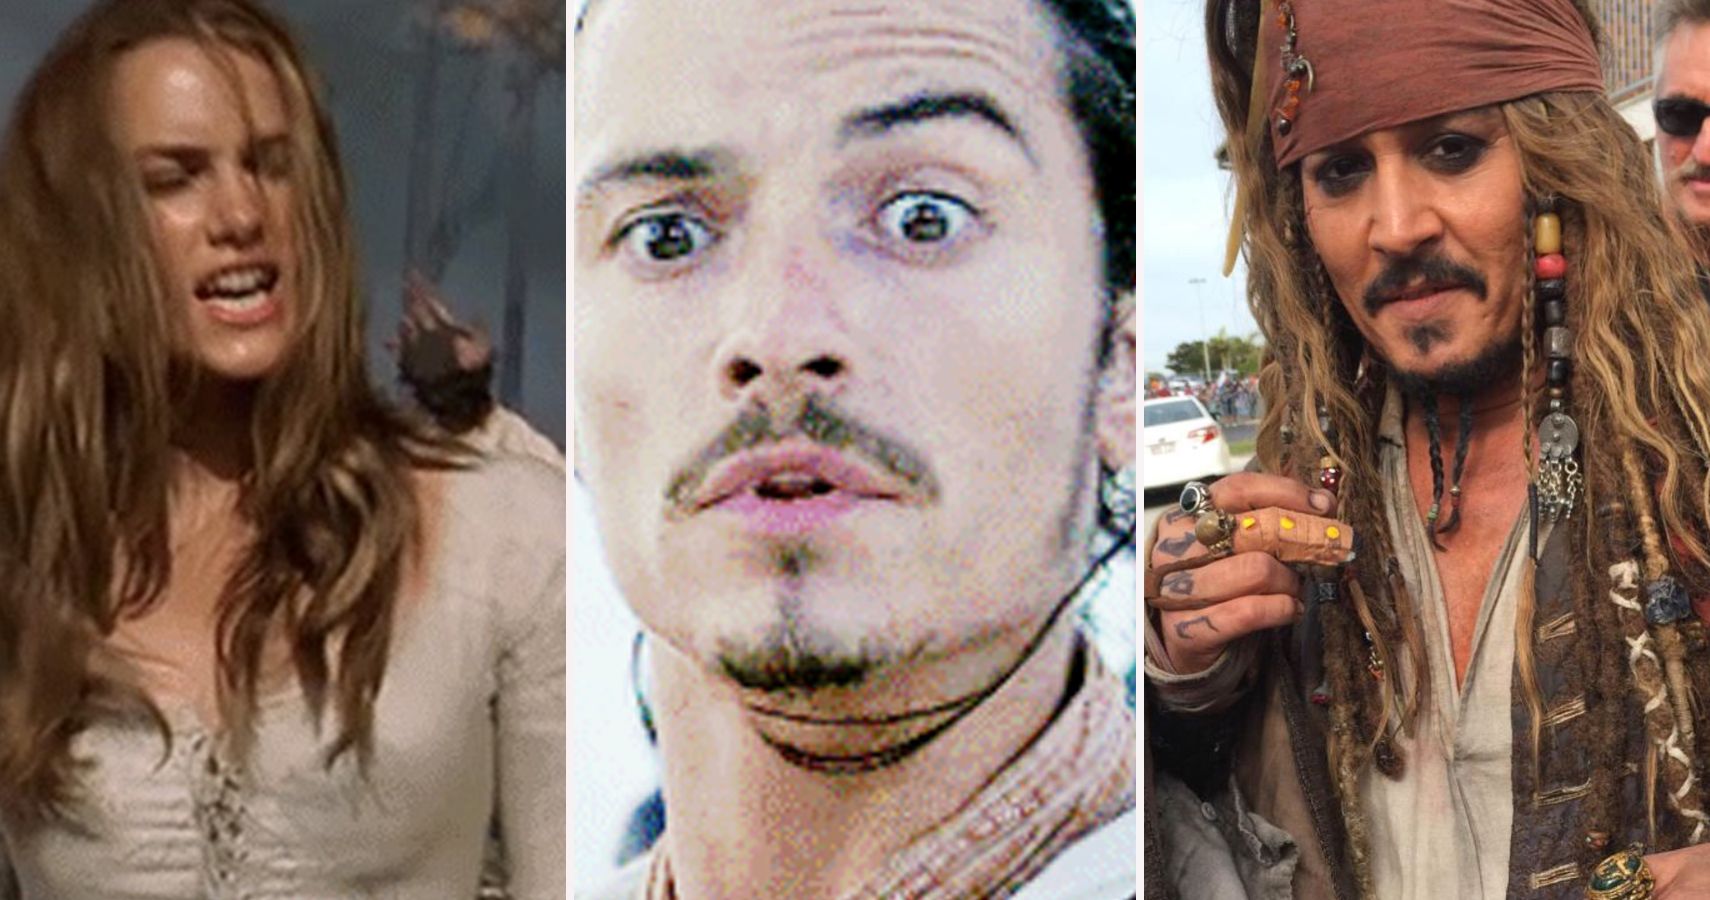 Pirates Of The Caribbean 25 Secrets Whose Depths We Couldn’t Even Fathom